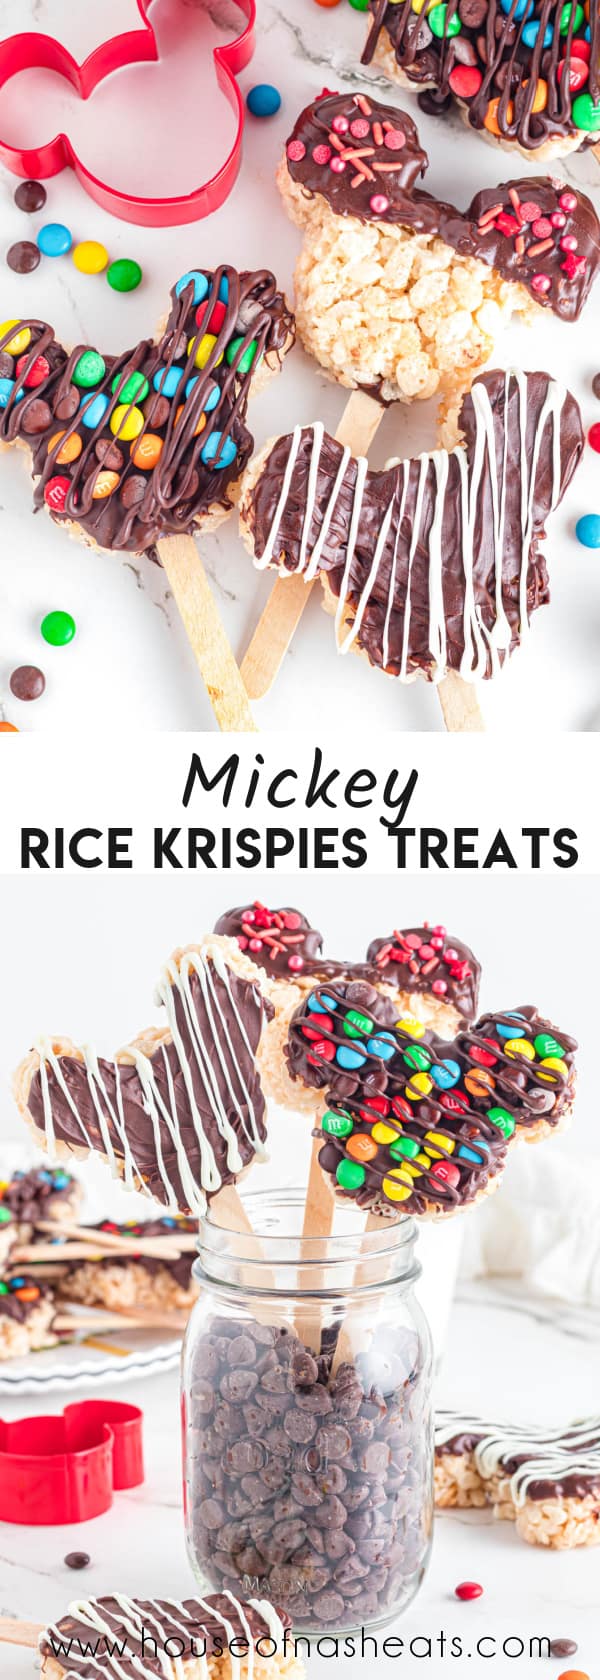 A collage of Mickey rice krispies treats with text overlay.